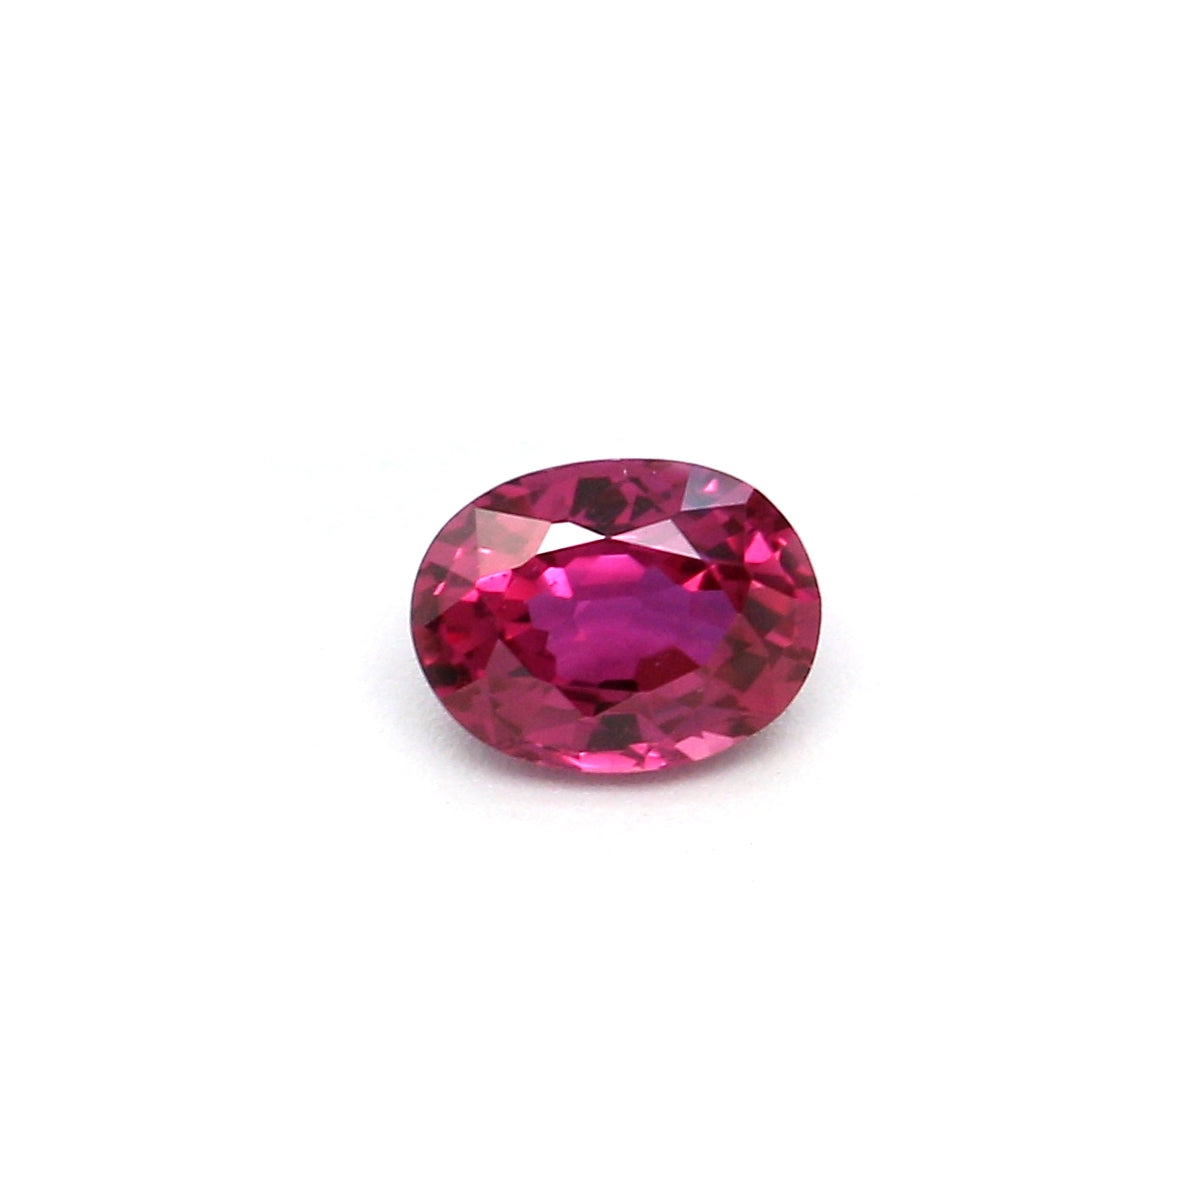 0.30ct Pinkish Red, Oval Ruby, Heated, Thailand - 4.52 x 3.47 x 2.22mm